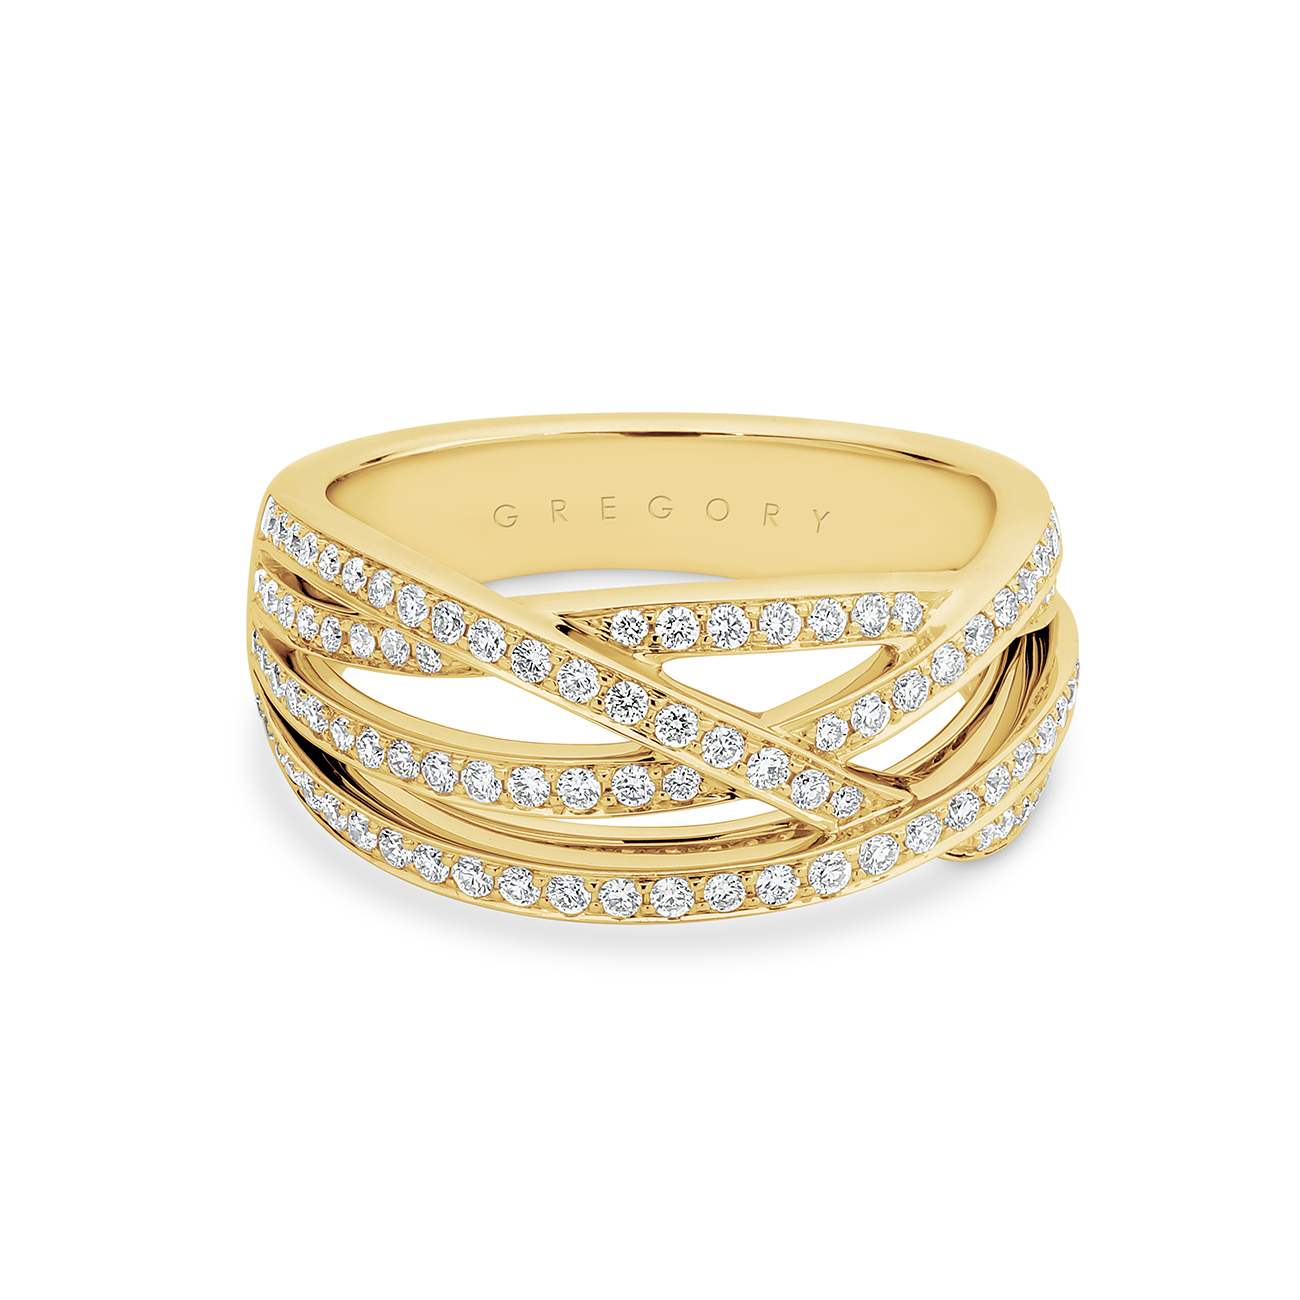 Fancy Crossover Diamond Dress Ring in Yellow Gold